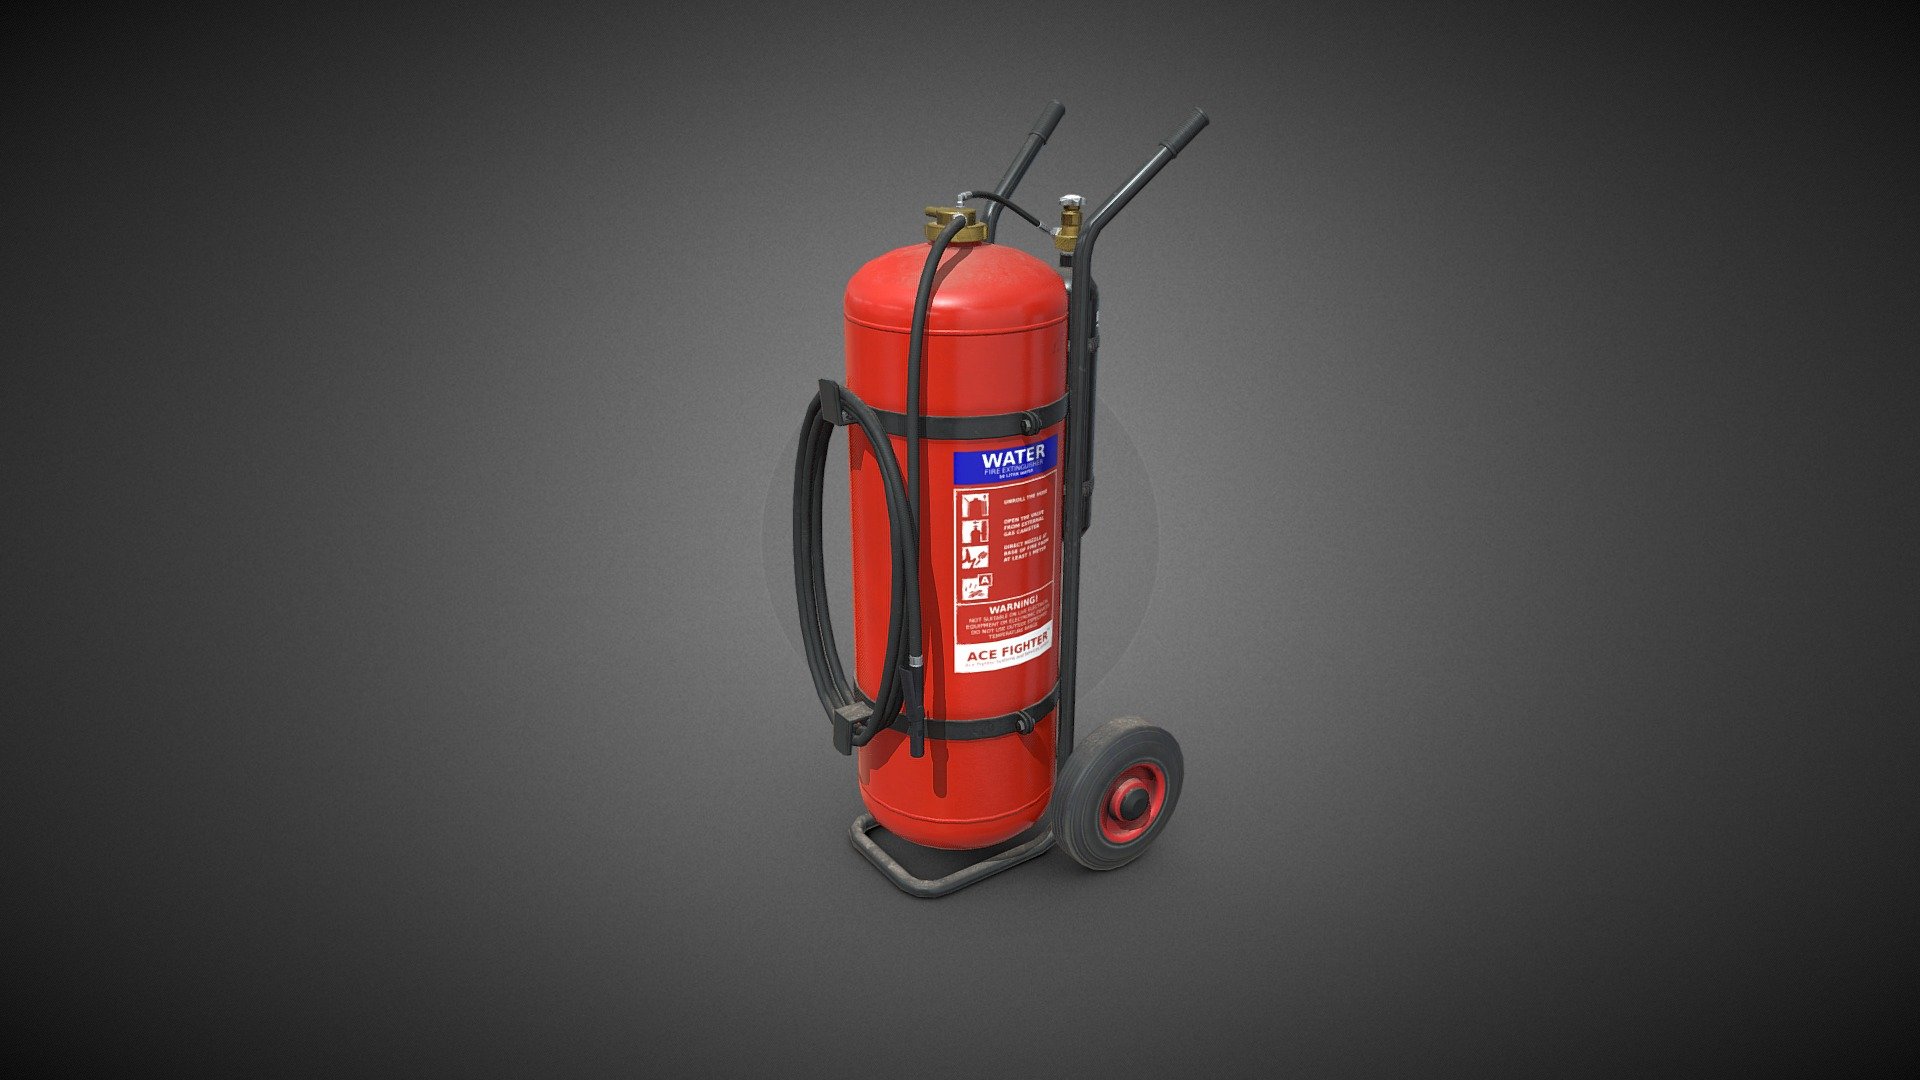 Highly detailed low poly model of a wheeled fire extinguisher. Suitable for industrial visualization, simulators, and games.

Technical Features:


PBR Textures: base color, roughness, metallic, and normal map
Polys: 4,403 (8,510 tris)
Real-world scale based on references
All branding and labels are custom made

Formats included: .blend / .fbx / .obj

Textures:

This model includes 3 sets of PBR textures: red-black (as seen on the viewer), a full red (trolley is red instead of black), and a full green version. The 2 additional sets of textures are NOT included in the model as default; they need to be setup manually.


Number of textures: 12
Texture format: PNG
Texture size: 4096 x 4096

The model can be used in any game, personal project, ArchViz, etc. It may not be reselled or redistributed 3d model